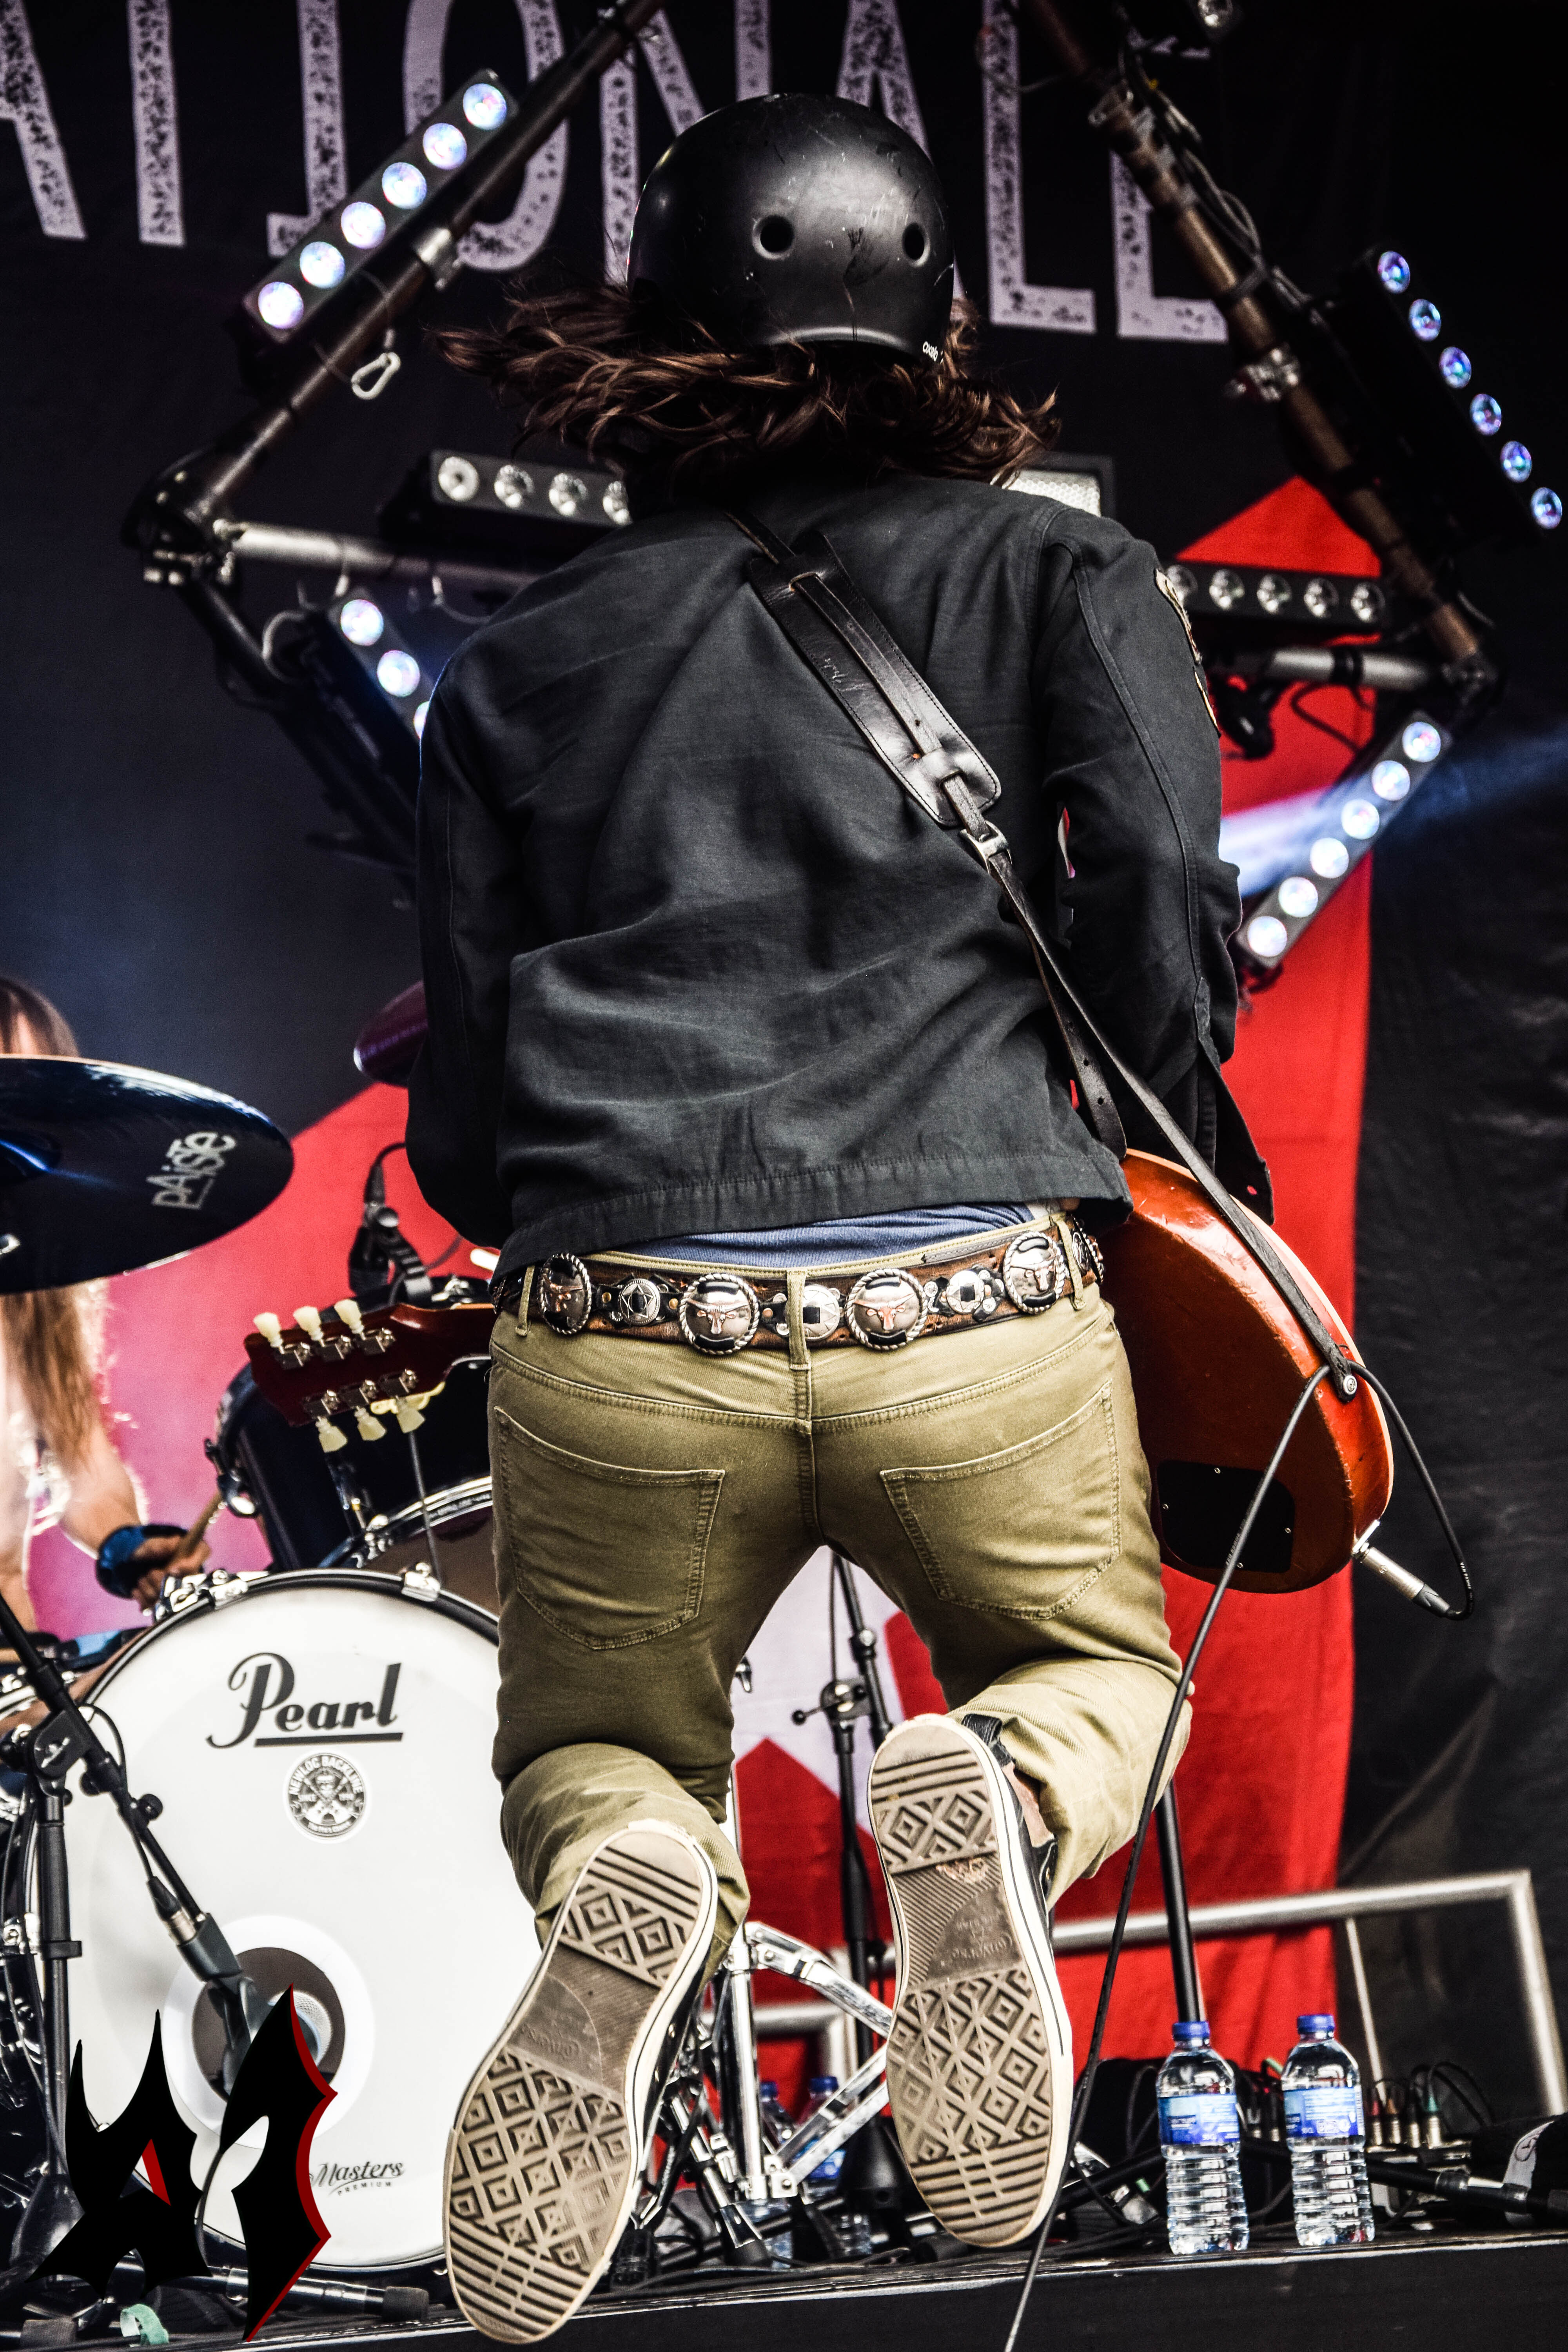 Donwload 2018 – Day 3 - The Last Internationale 19